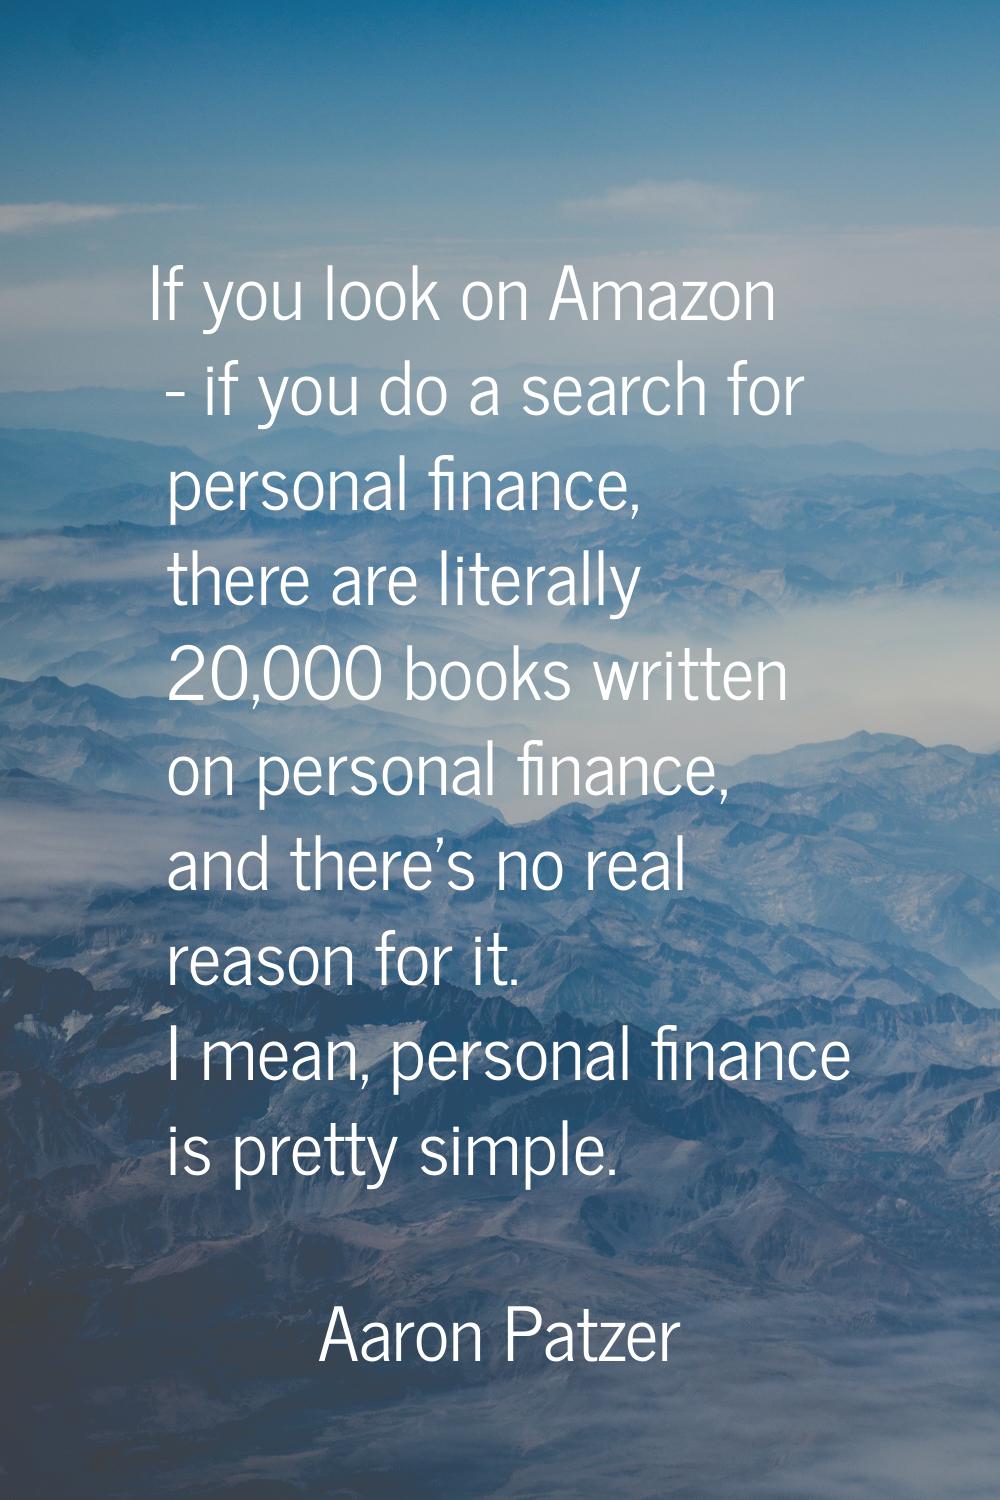 If you look on Amazon - if you do a search for personal finance, there are literally 20,000 books w